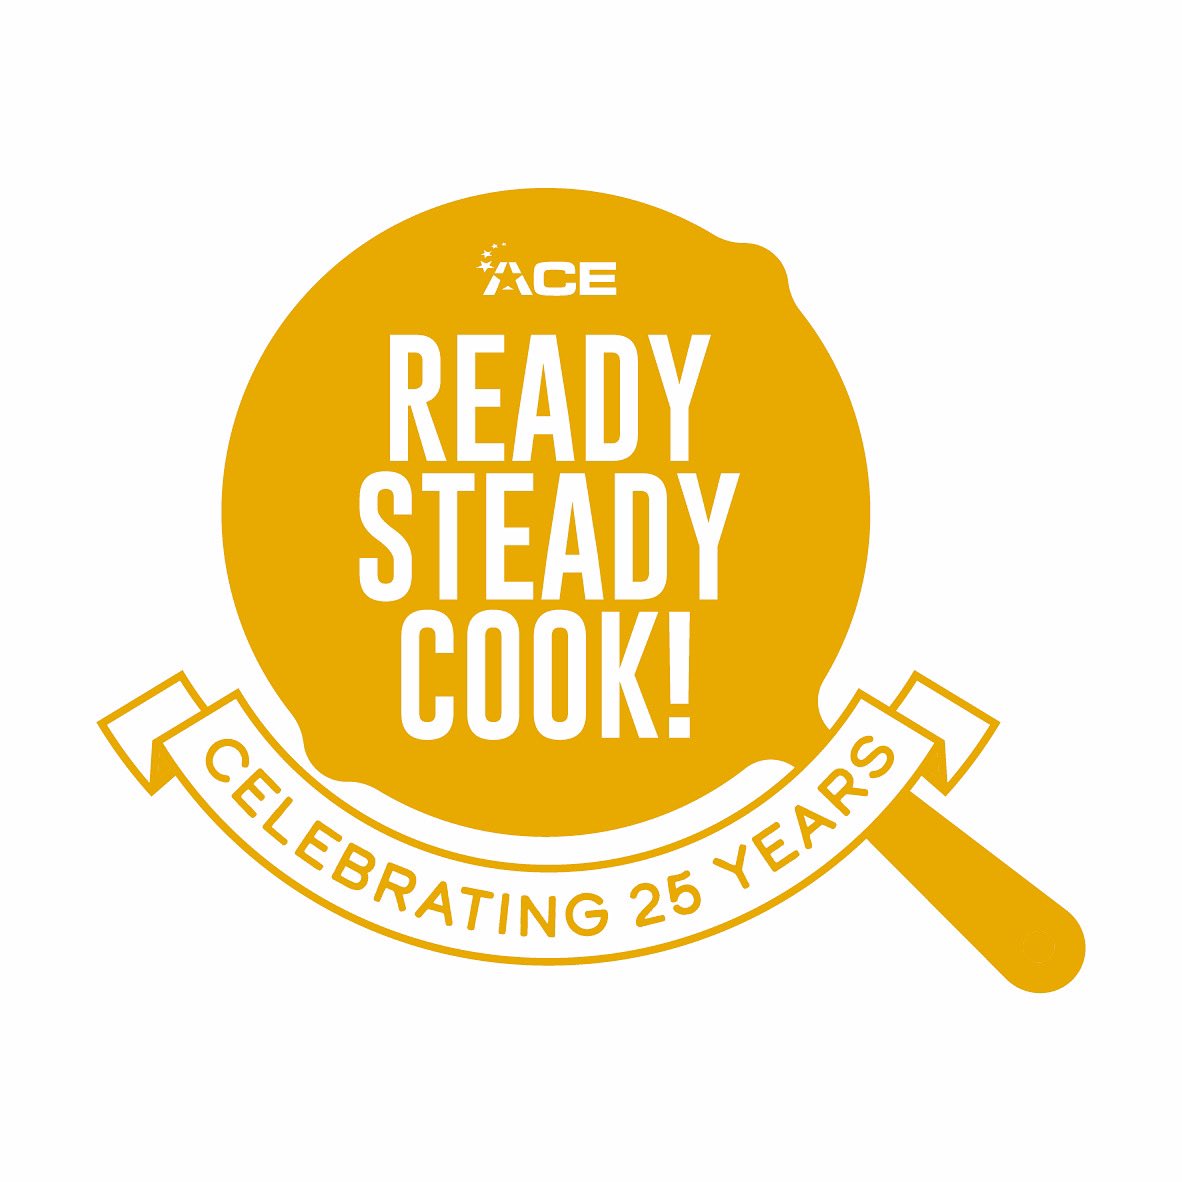 Save the date Tuesday 19th September ⭐️ New Venue ⭐️New location Skylight Peckham⭐️New format⭐️New judges #ACEReadysteadycook23 #ACERSC23 #hospitalitynetworking